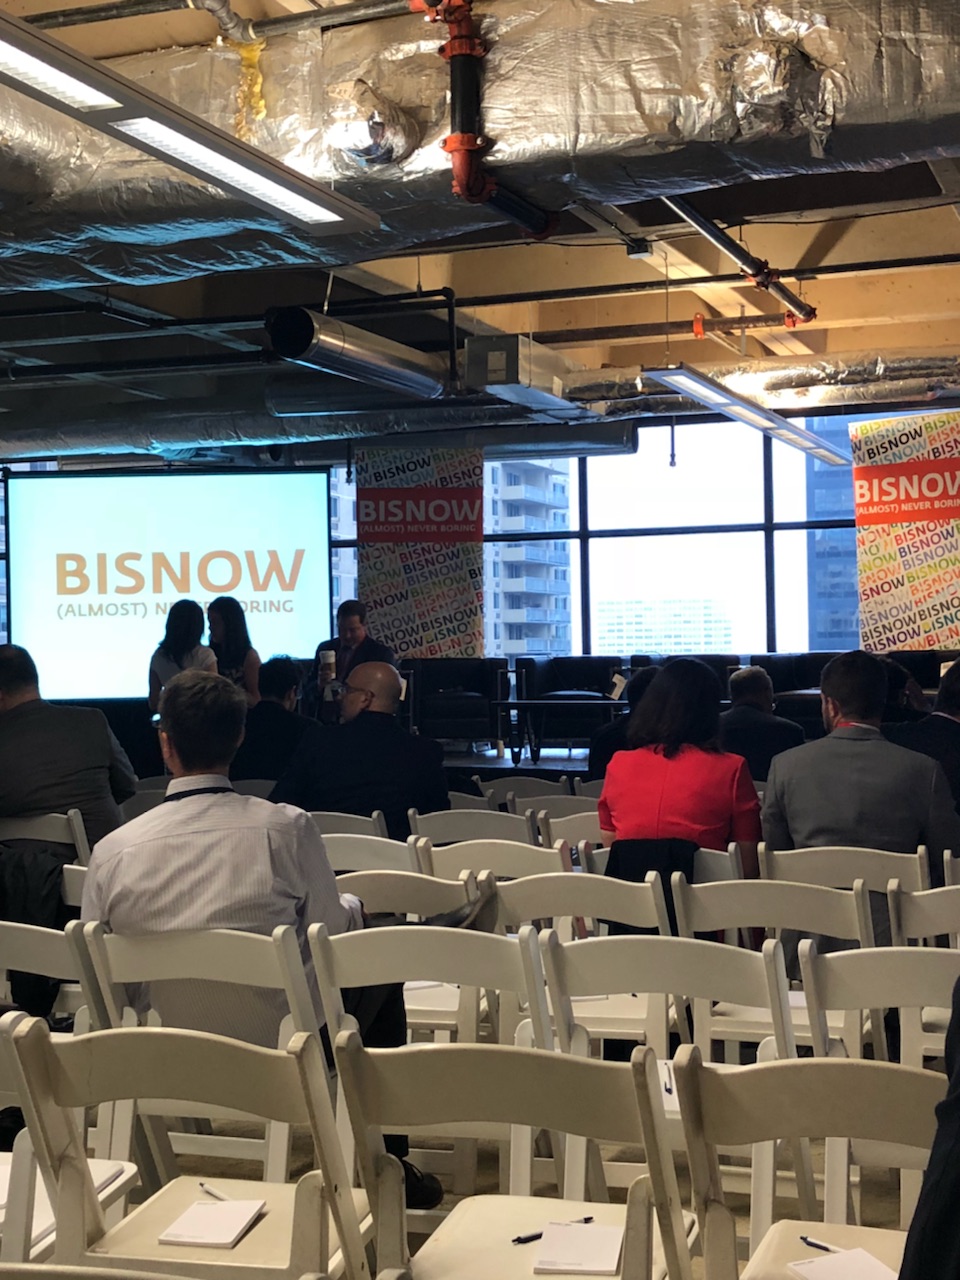 Real Estate is all about relationships, and networking opportunities especially at the Bisnow Philadelphia State of the Market Event!